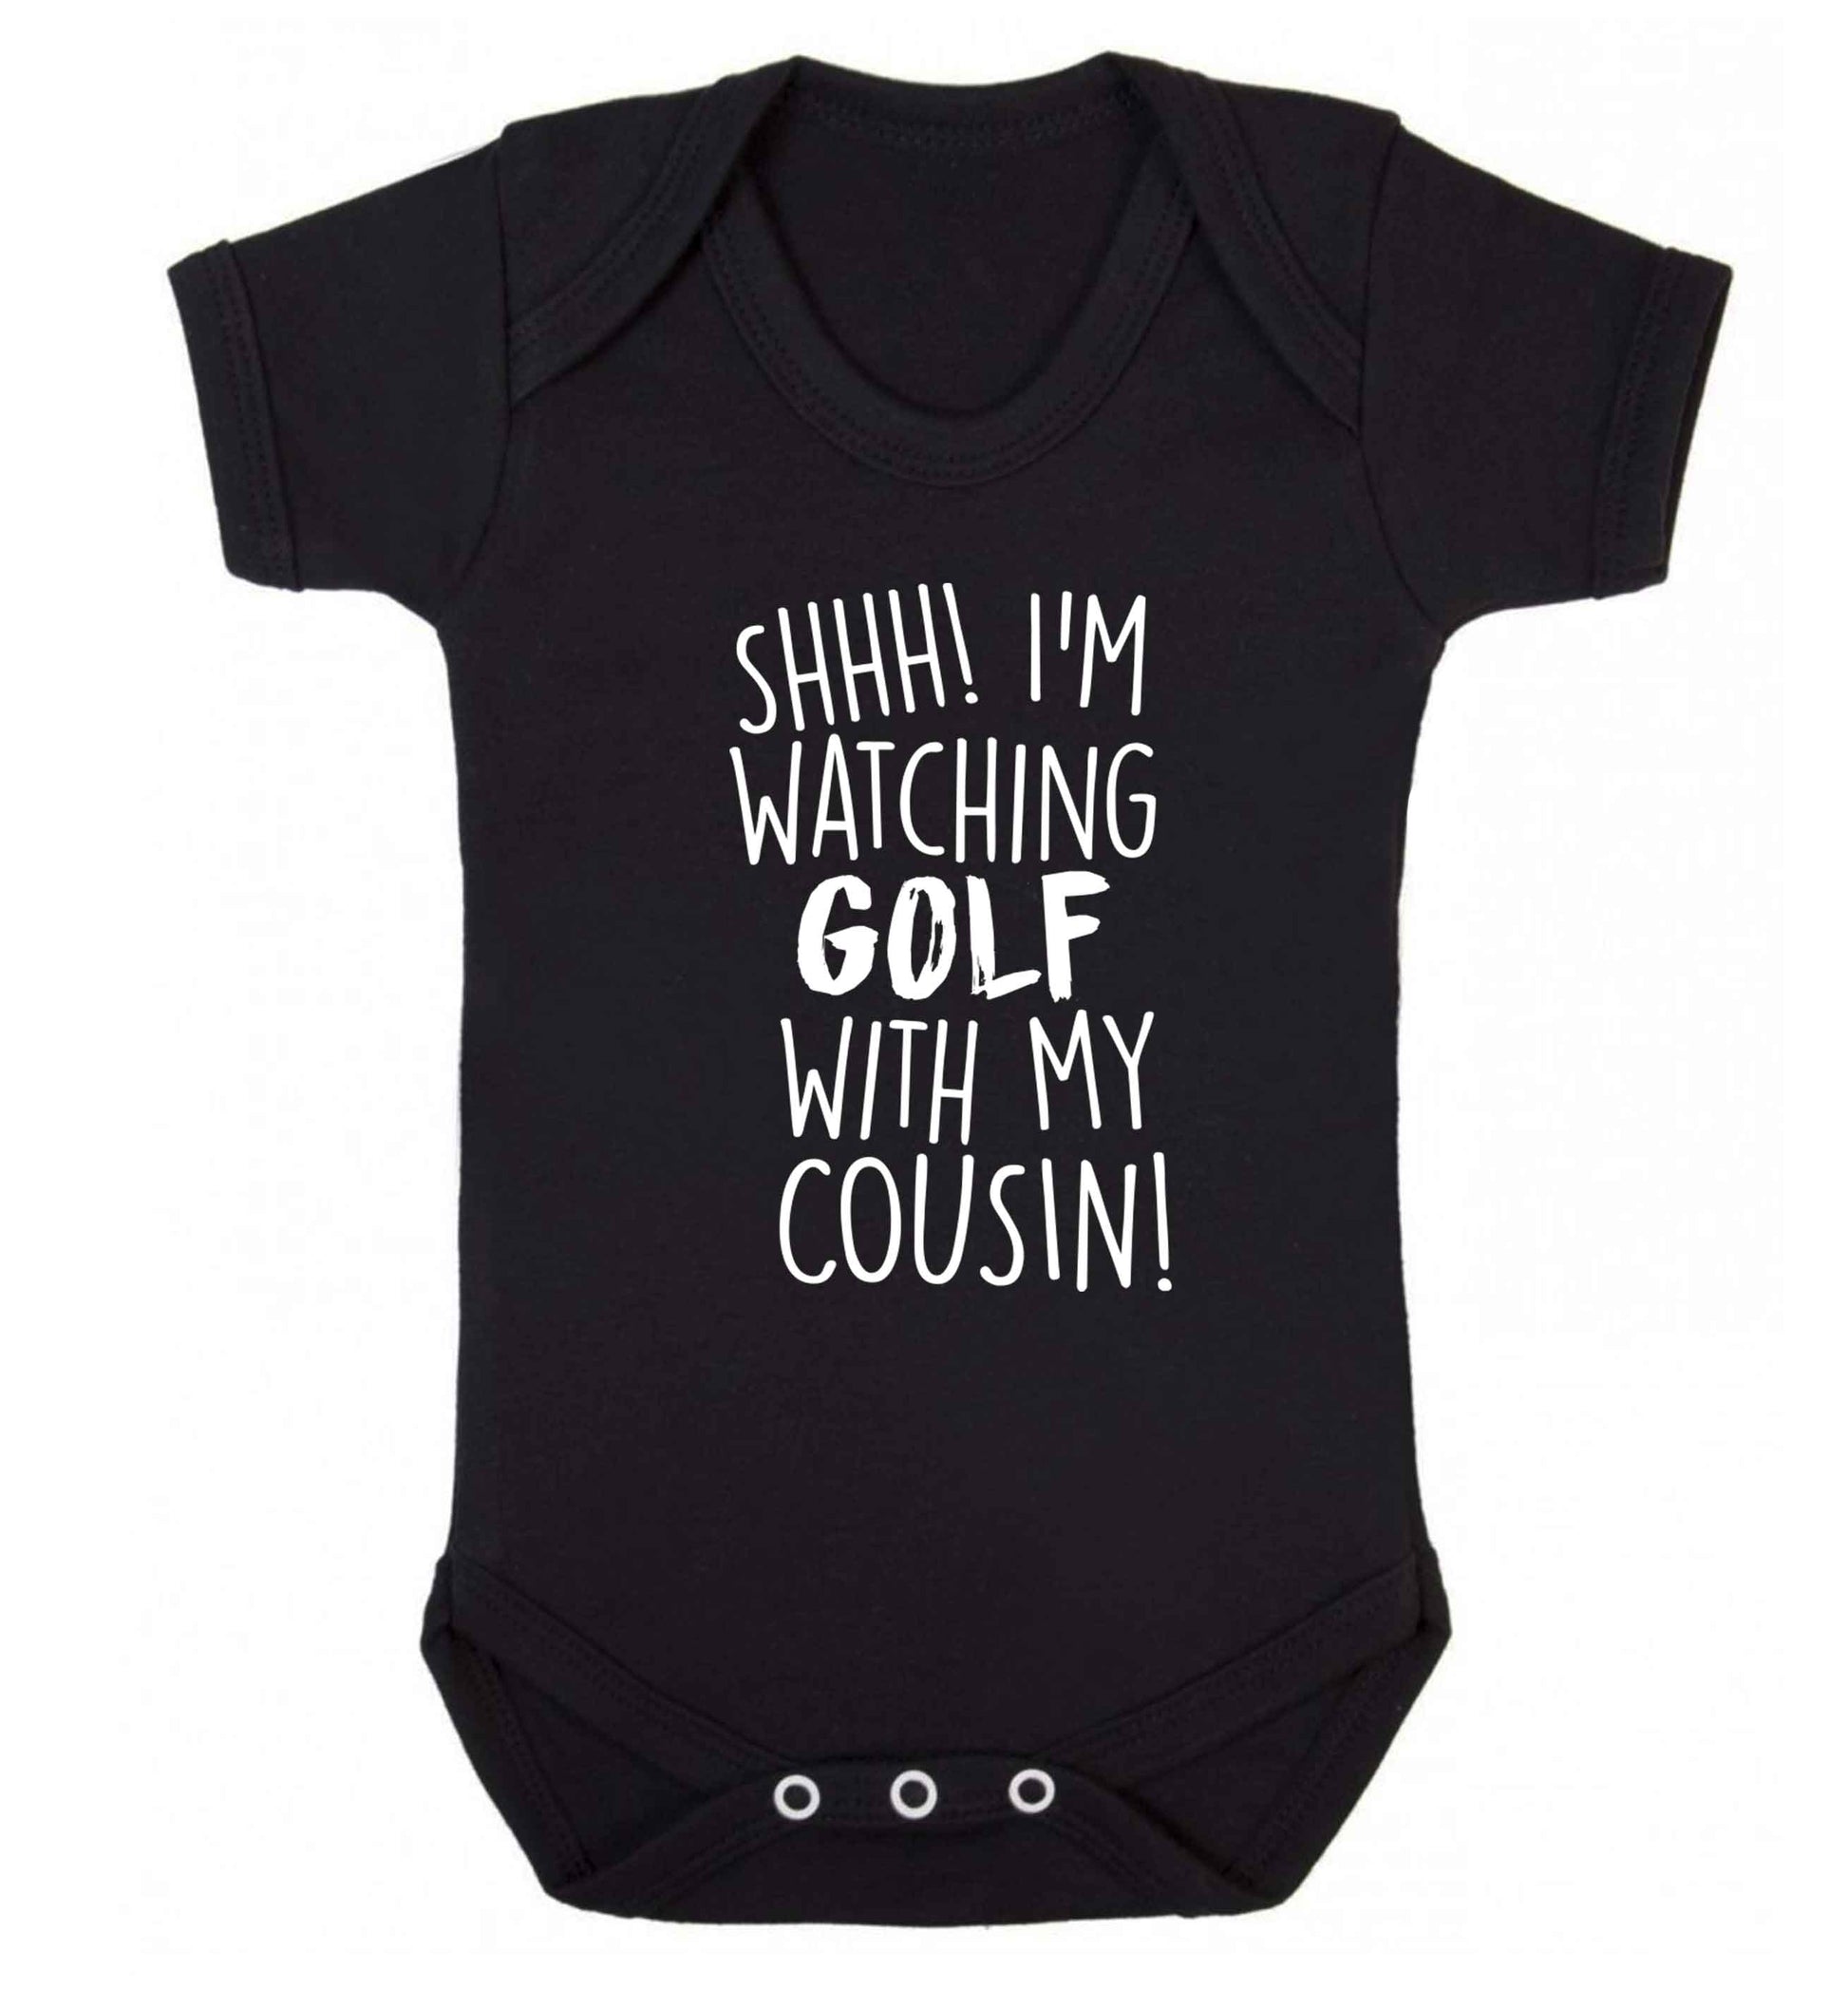 Shh I'm watching golf with my cousin Baby Vest black 18-24 months